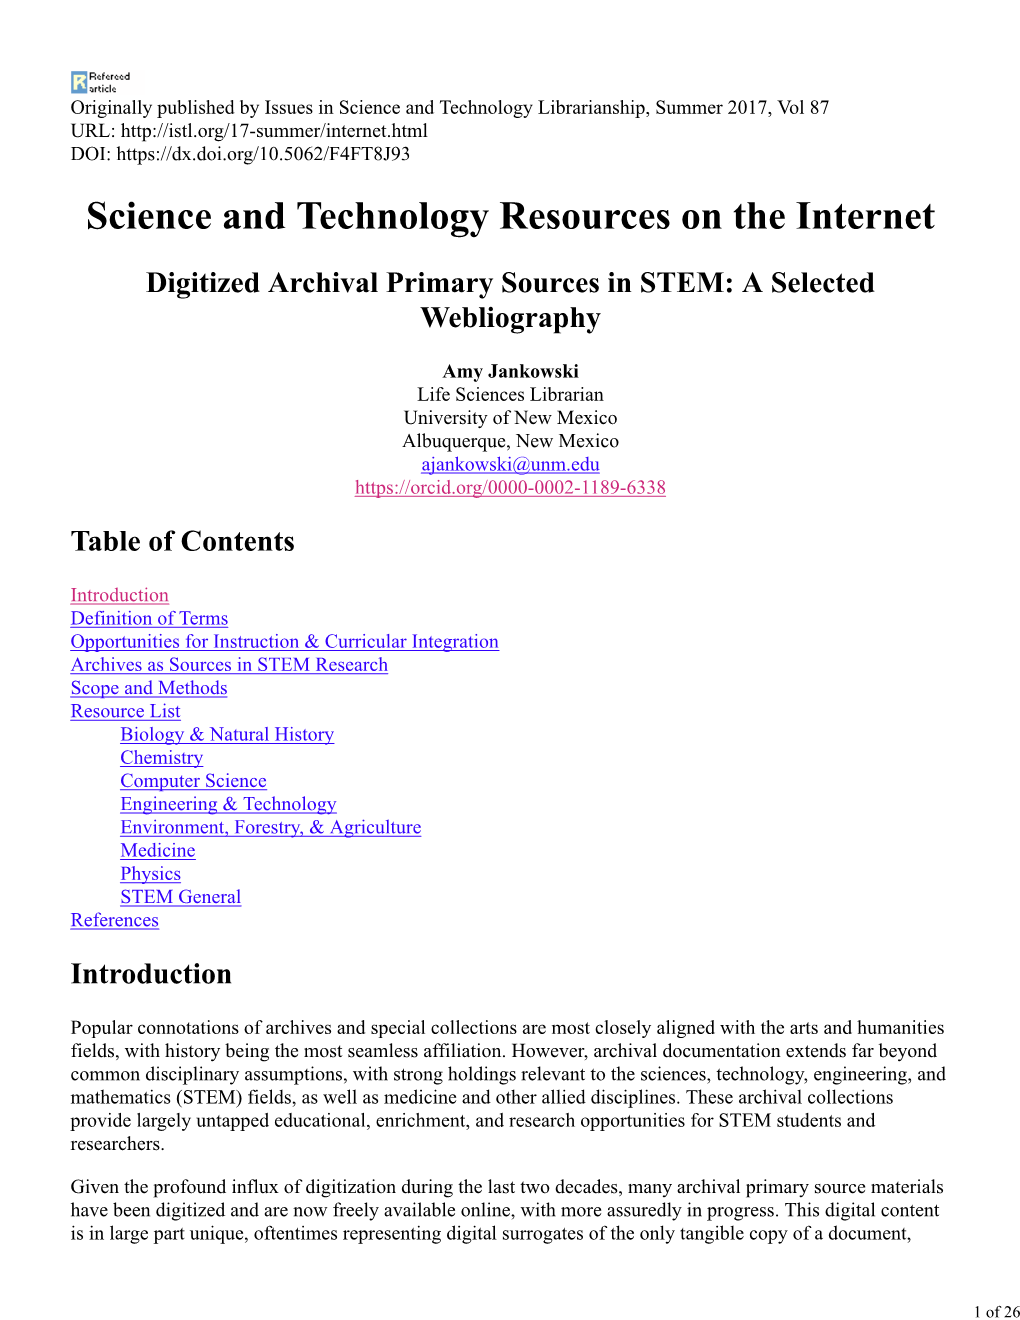 Digitized Archival Primary Sources in STEM: a Selected Webliography